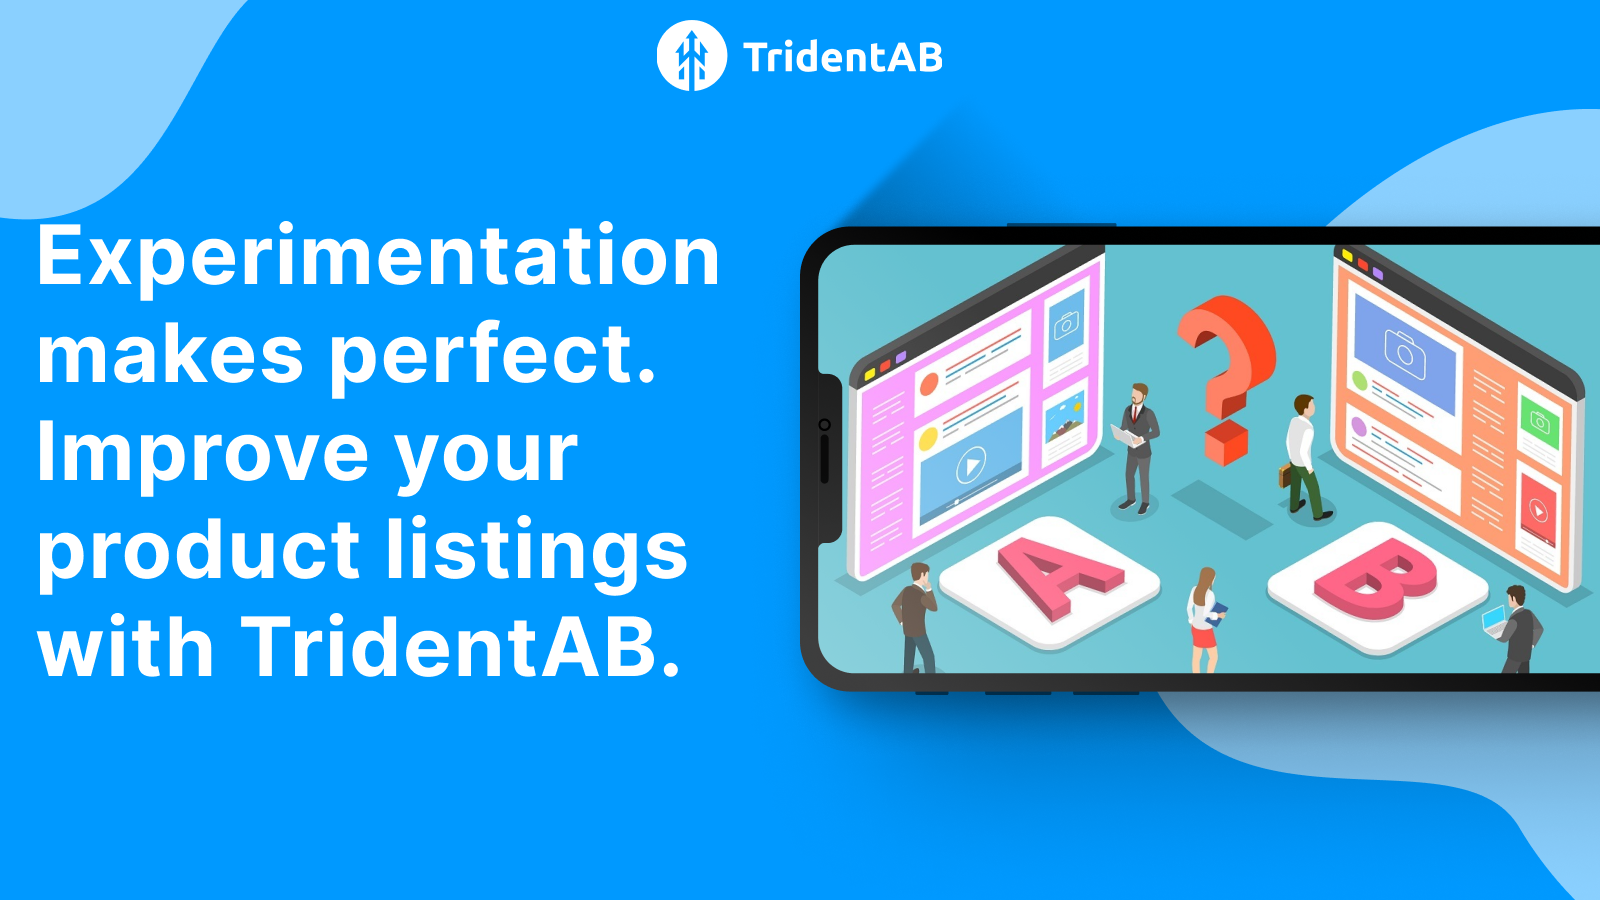 Improve your product listings with TridentAB